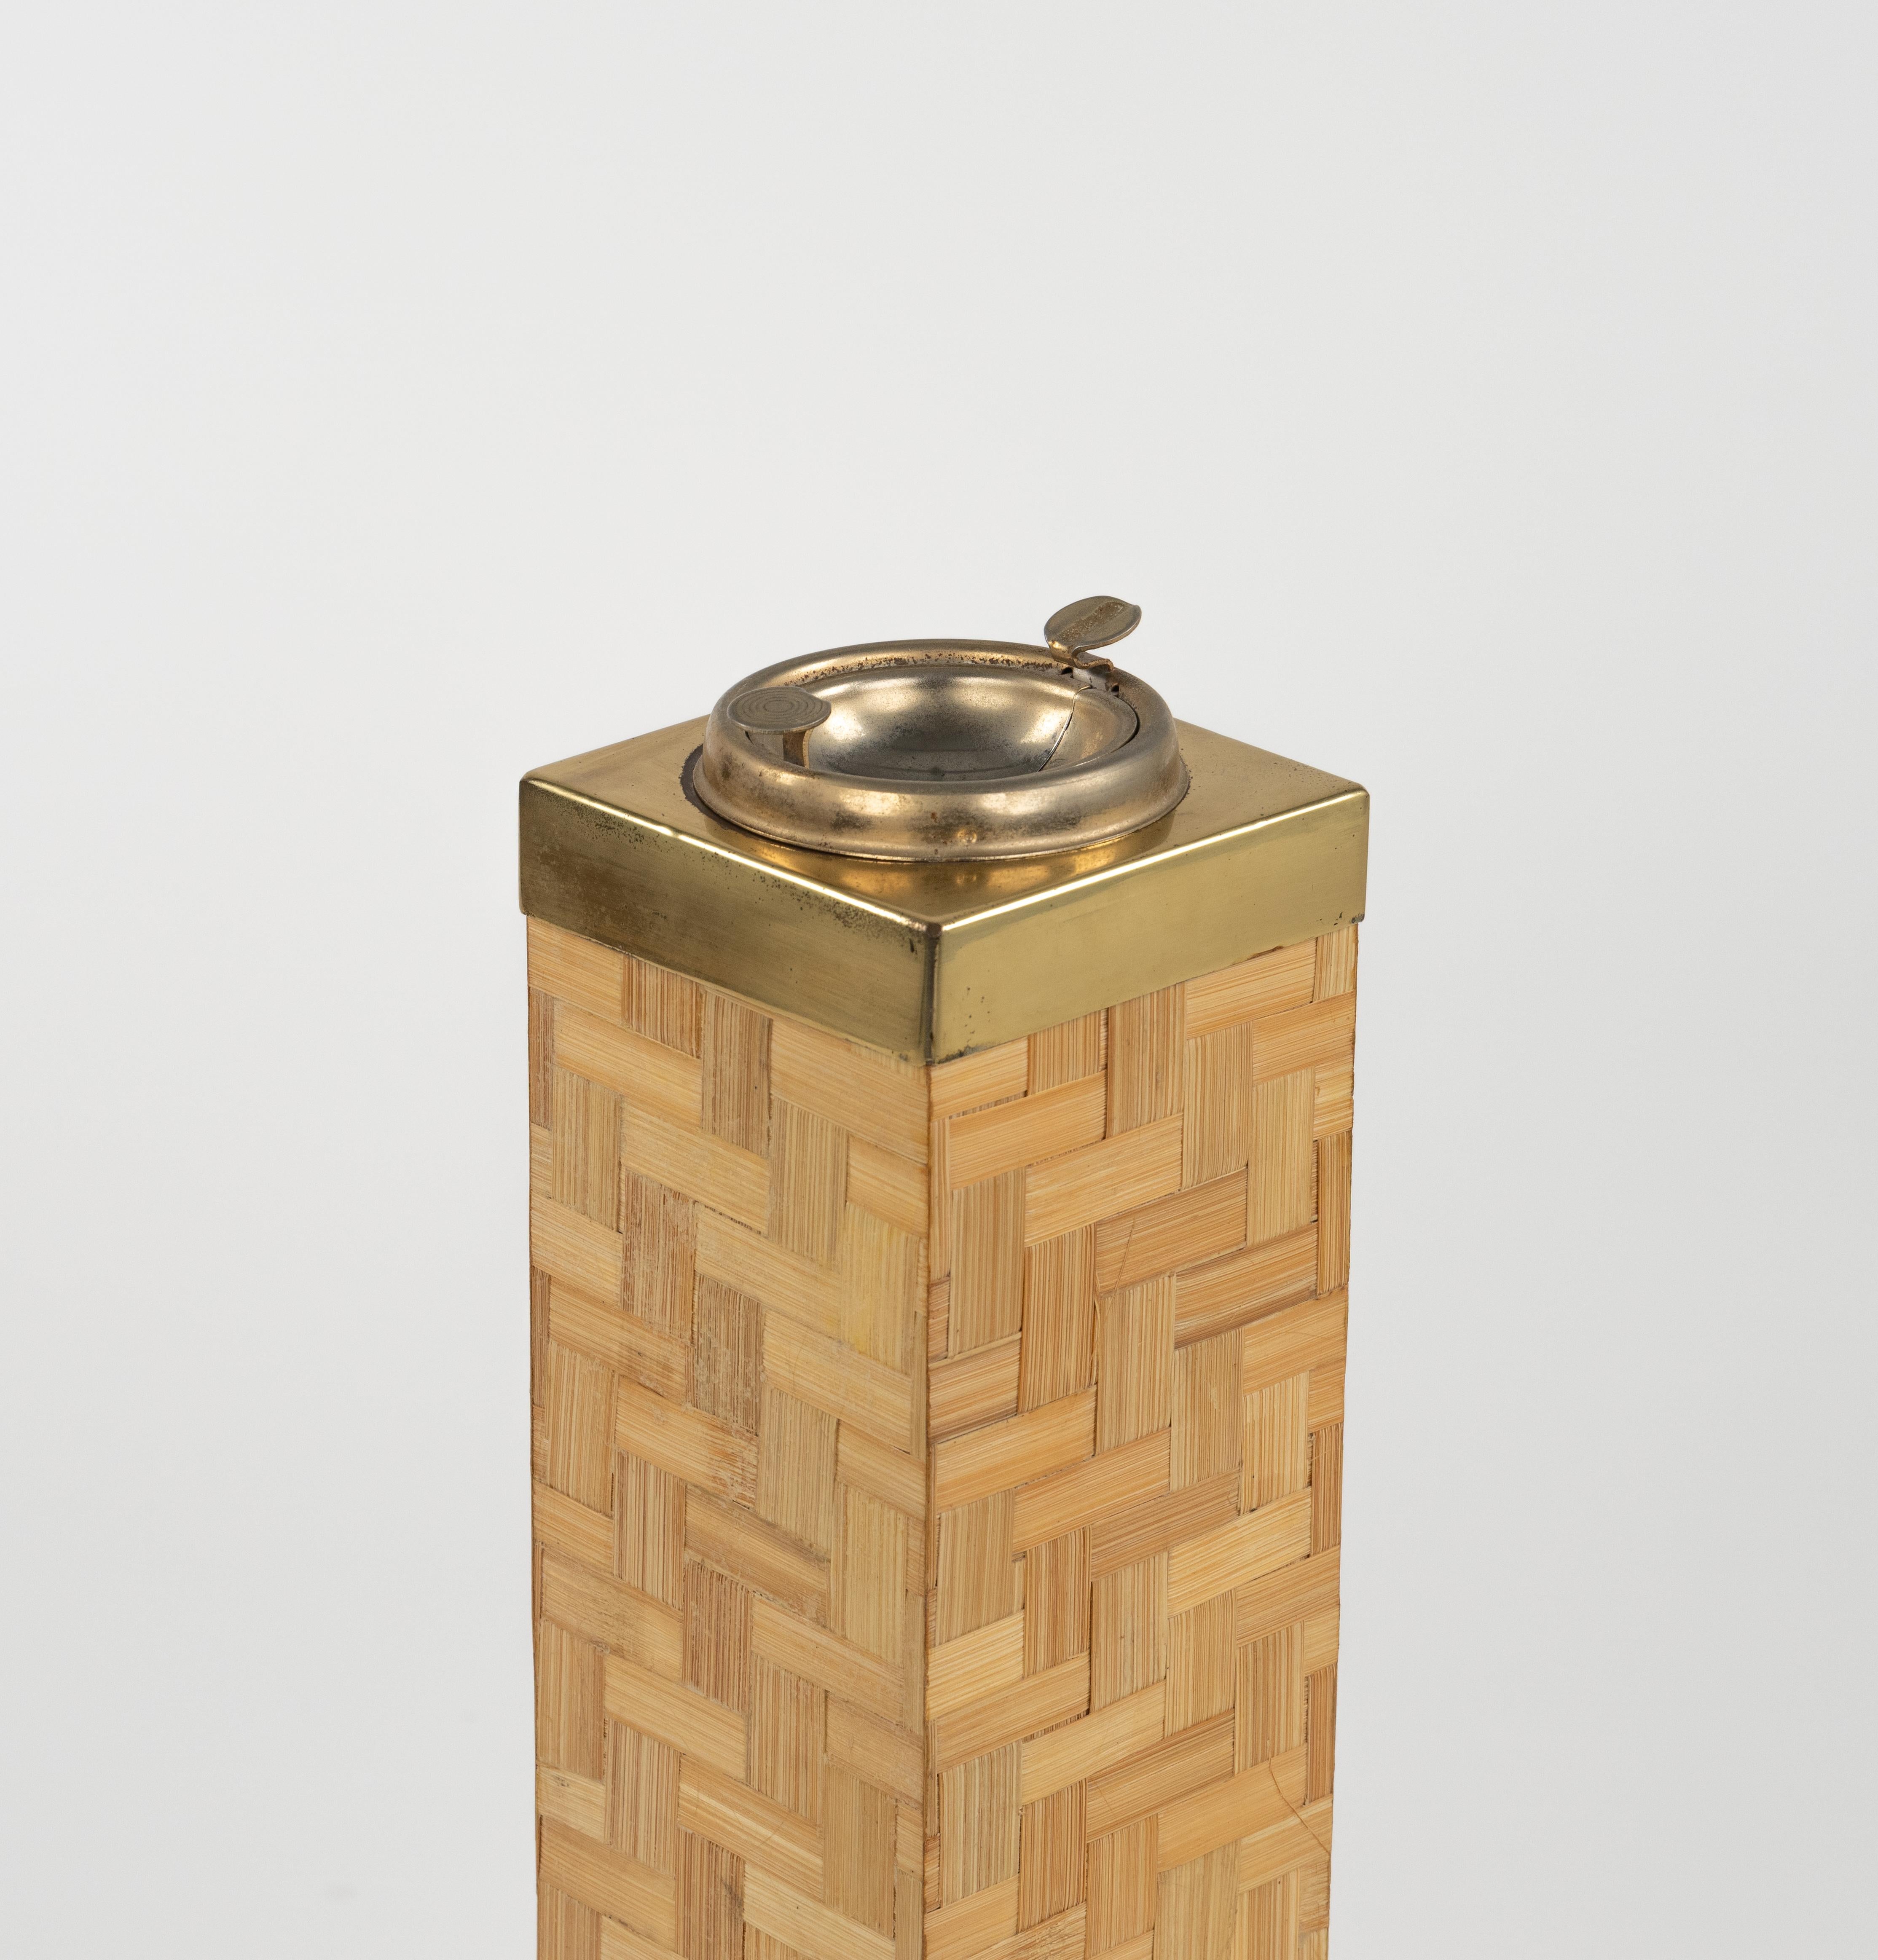 Midcentury Floor Ashtray in Bamboo and Brass, Italy 1970s For Sale 5